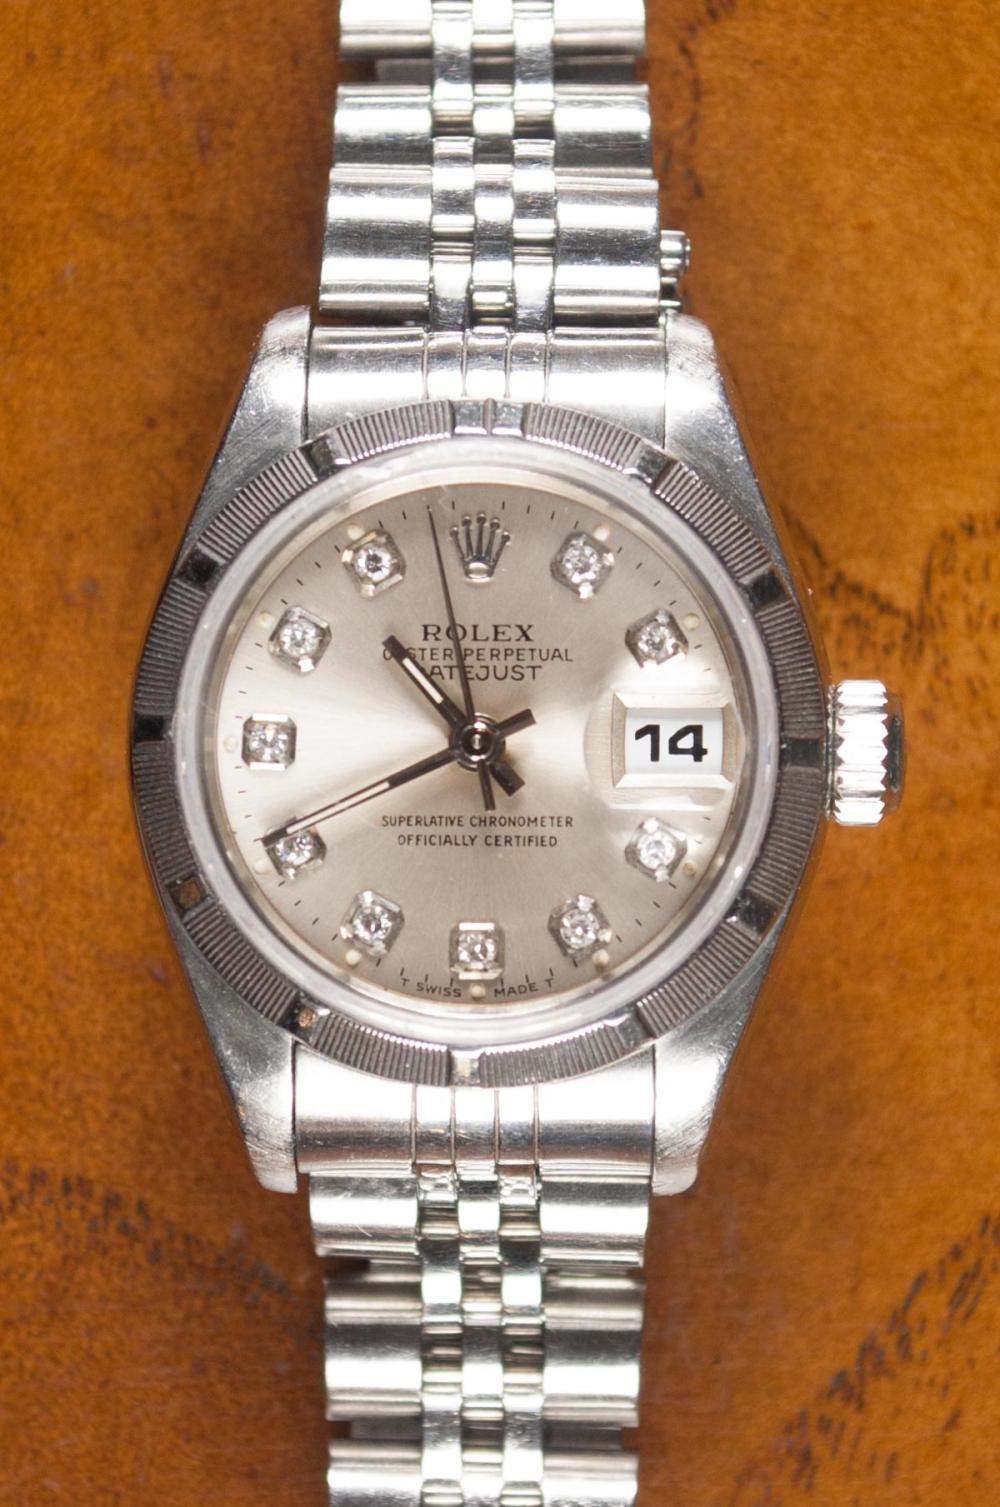 LADYS ROLEX OYSTER PERPETUAL DATEJUST